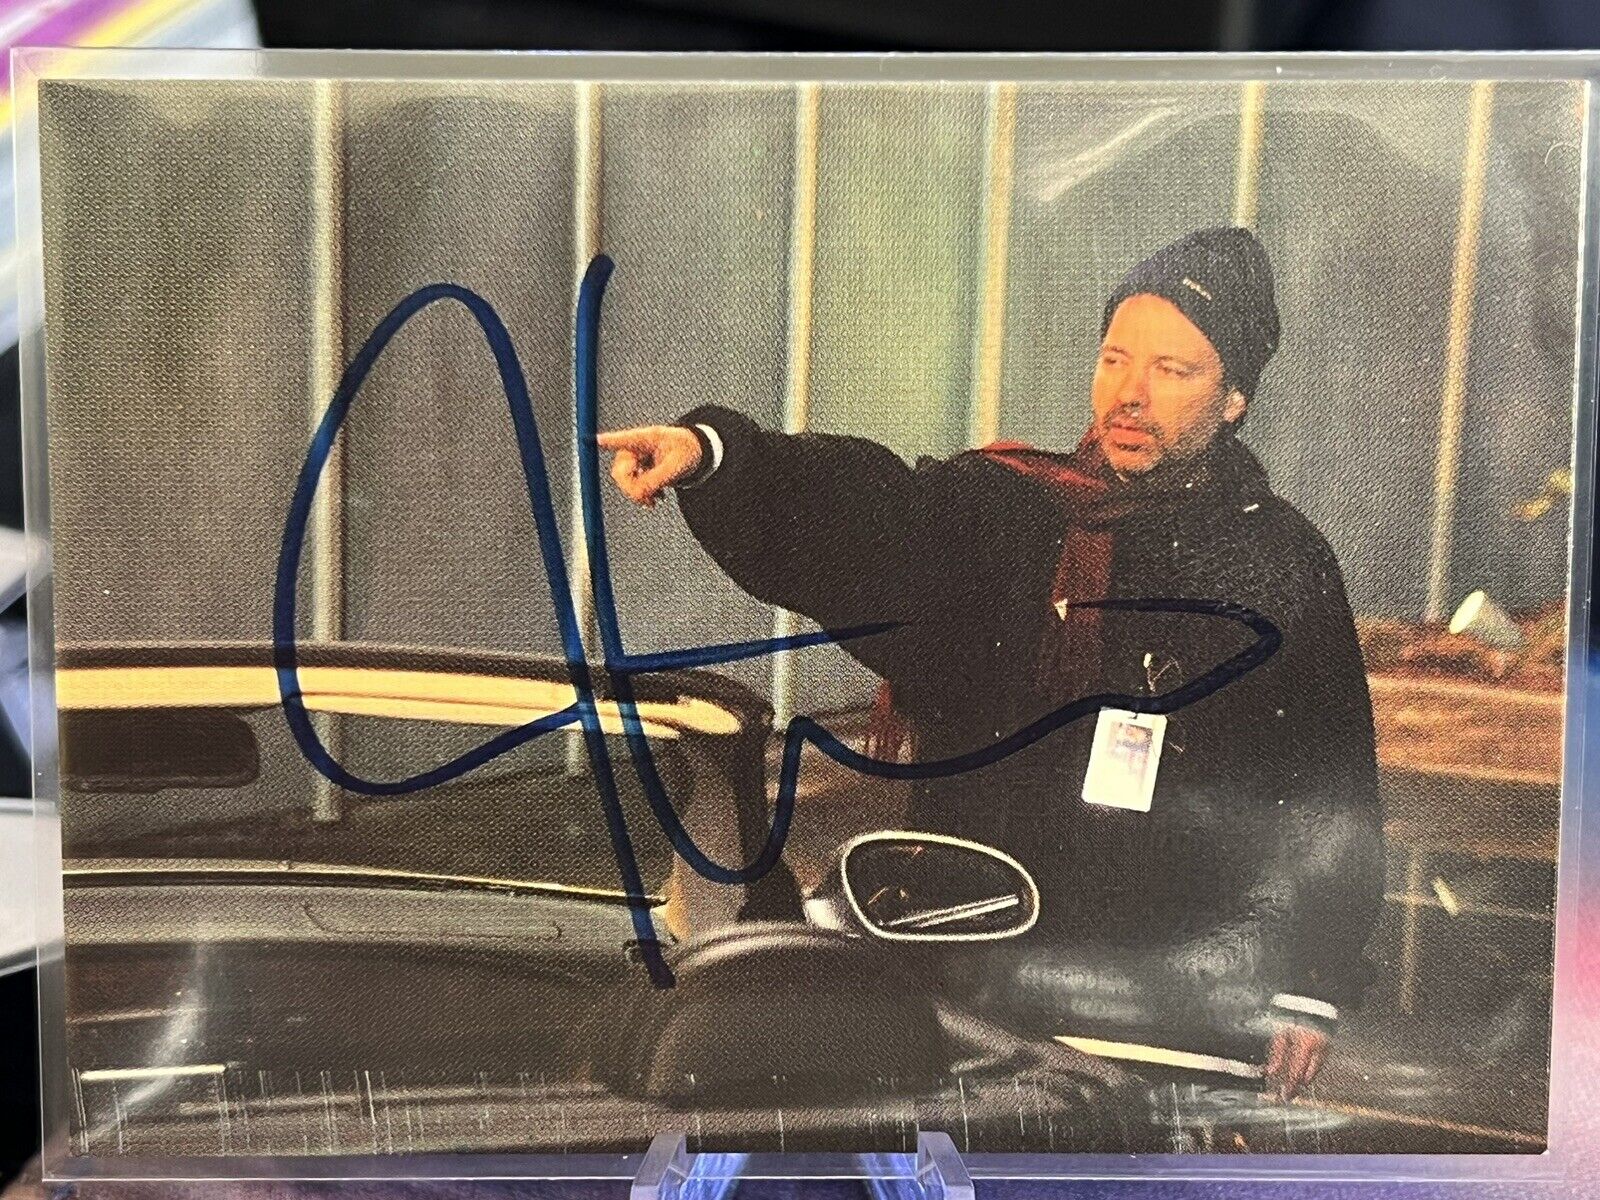 Terminator 3 Trading Cards Auto Card R4  Jonathan Mostow by Comic Image in 2003 